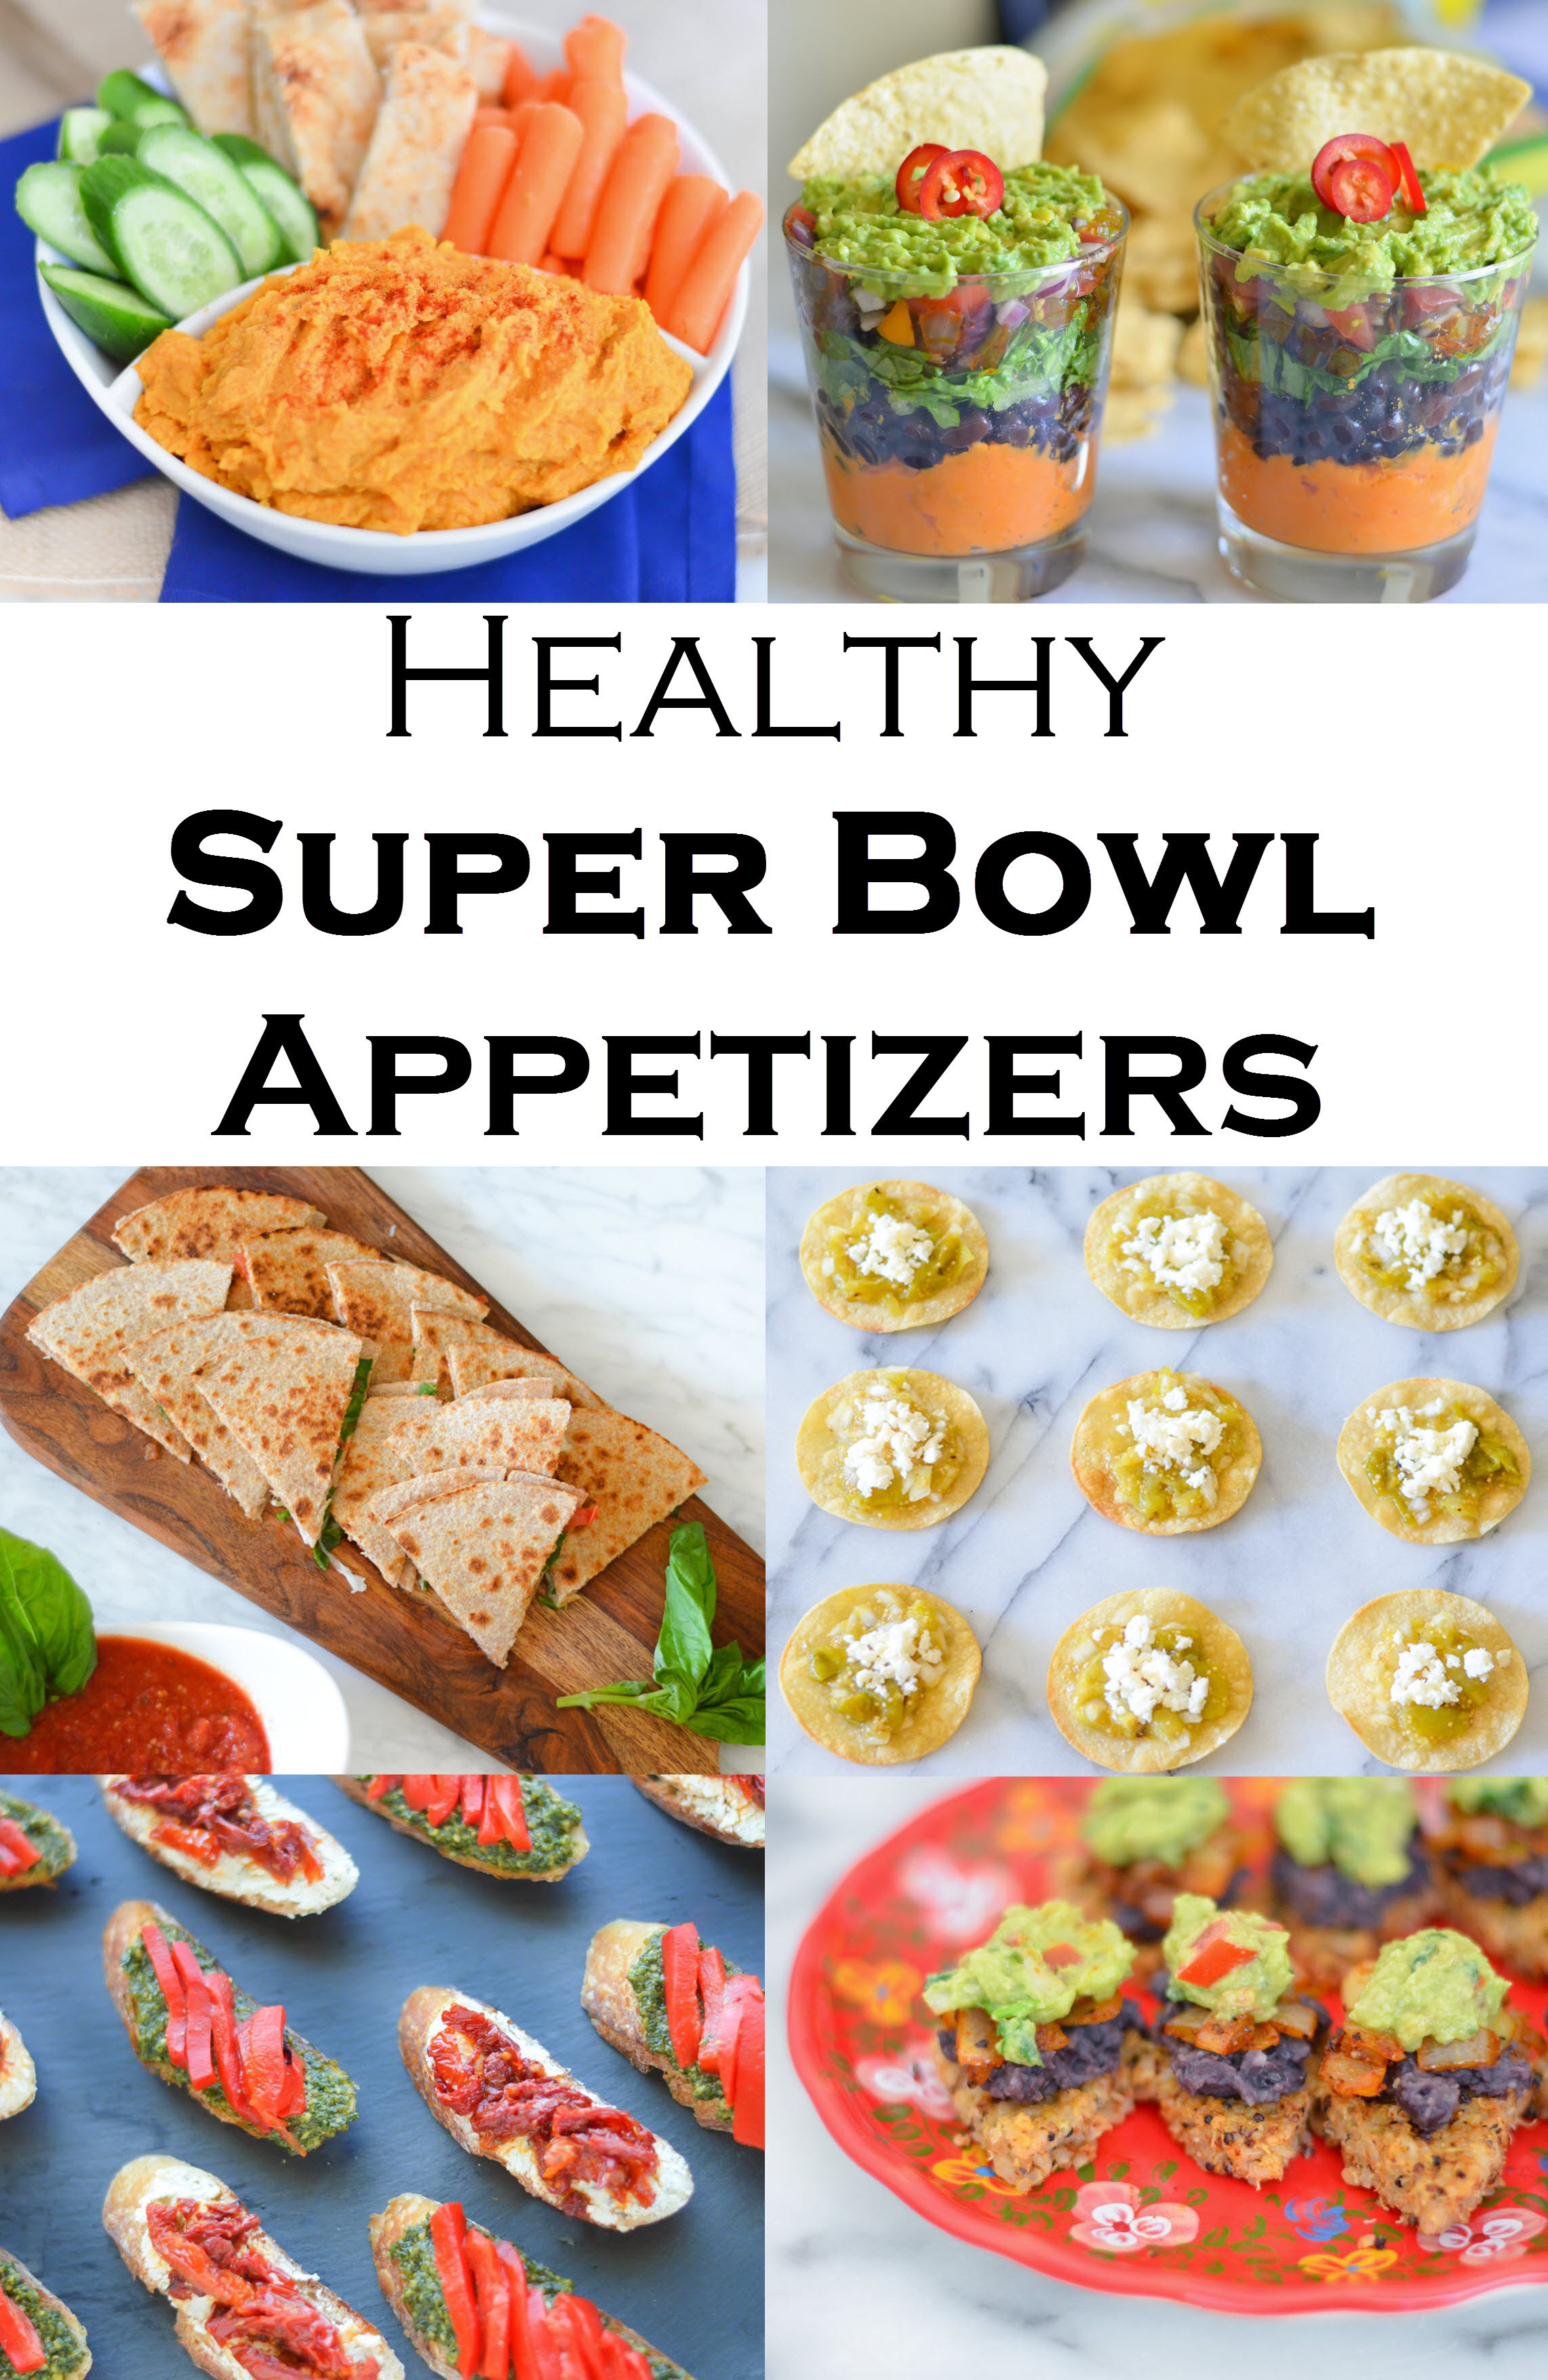 Healthy Super Bowl Appetizers
 Healthy Super Bowl Recipes For Everyone